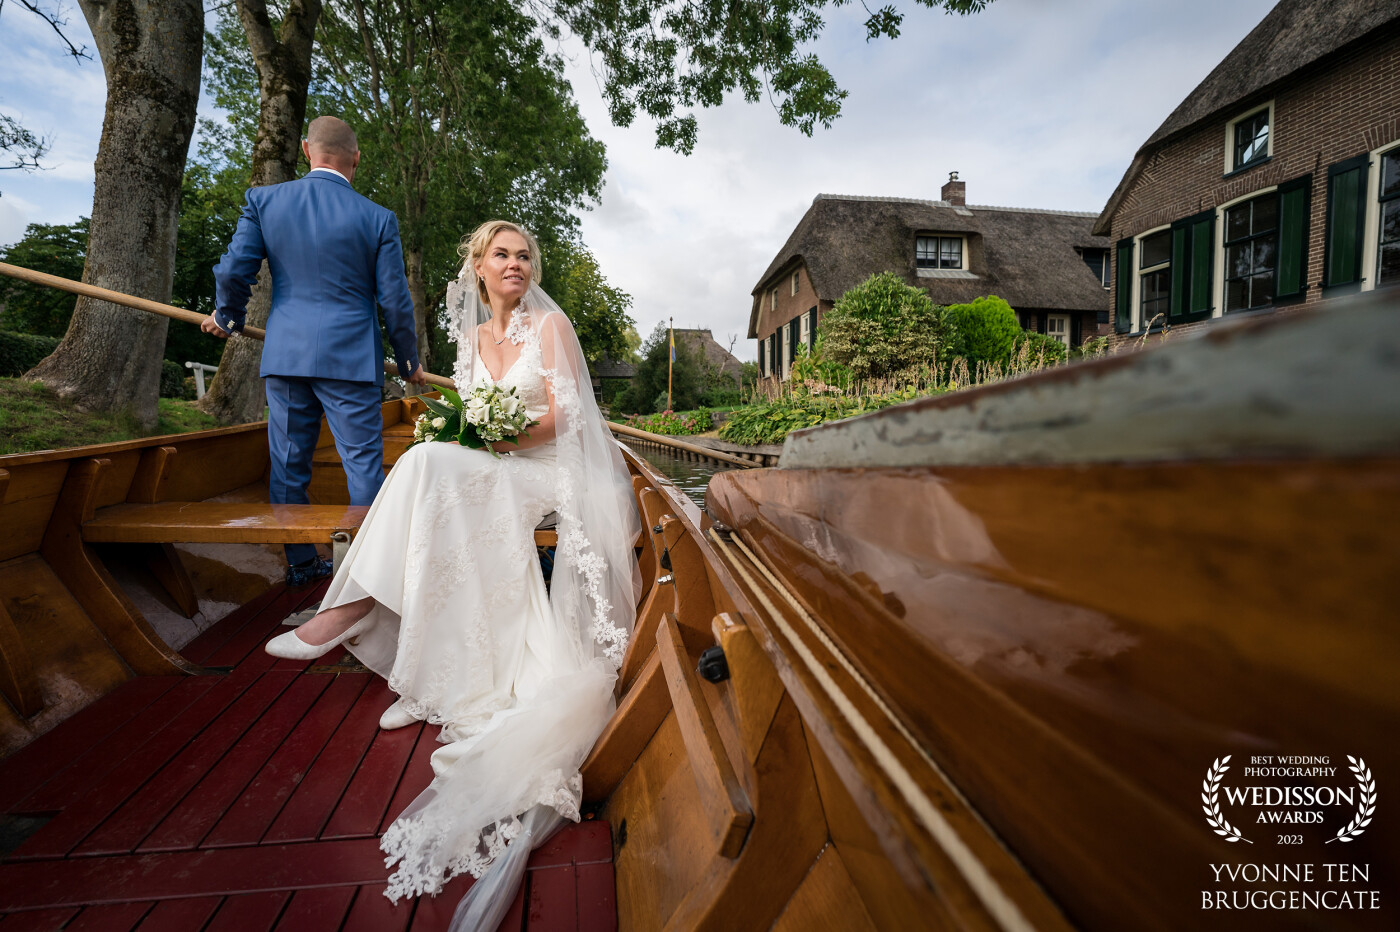 This beautiful wedding couple is on their way to the ceremony. That will take place in Giethoorn, the Dutch Venice, so there are almost no roads and traffic will take place by boats. It was such a wonderfull day and we've been so lucky with the weather. A dream coming true!